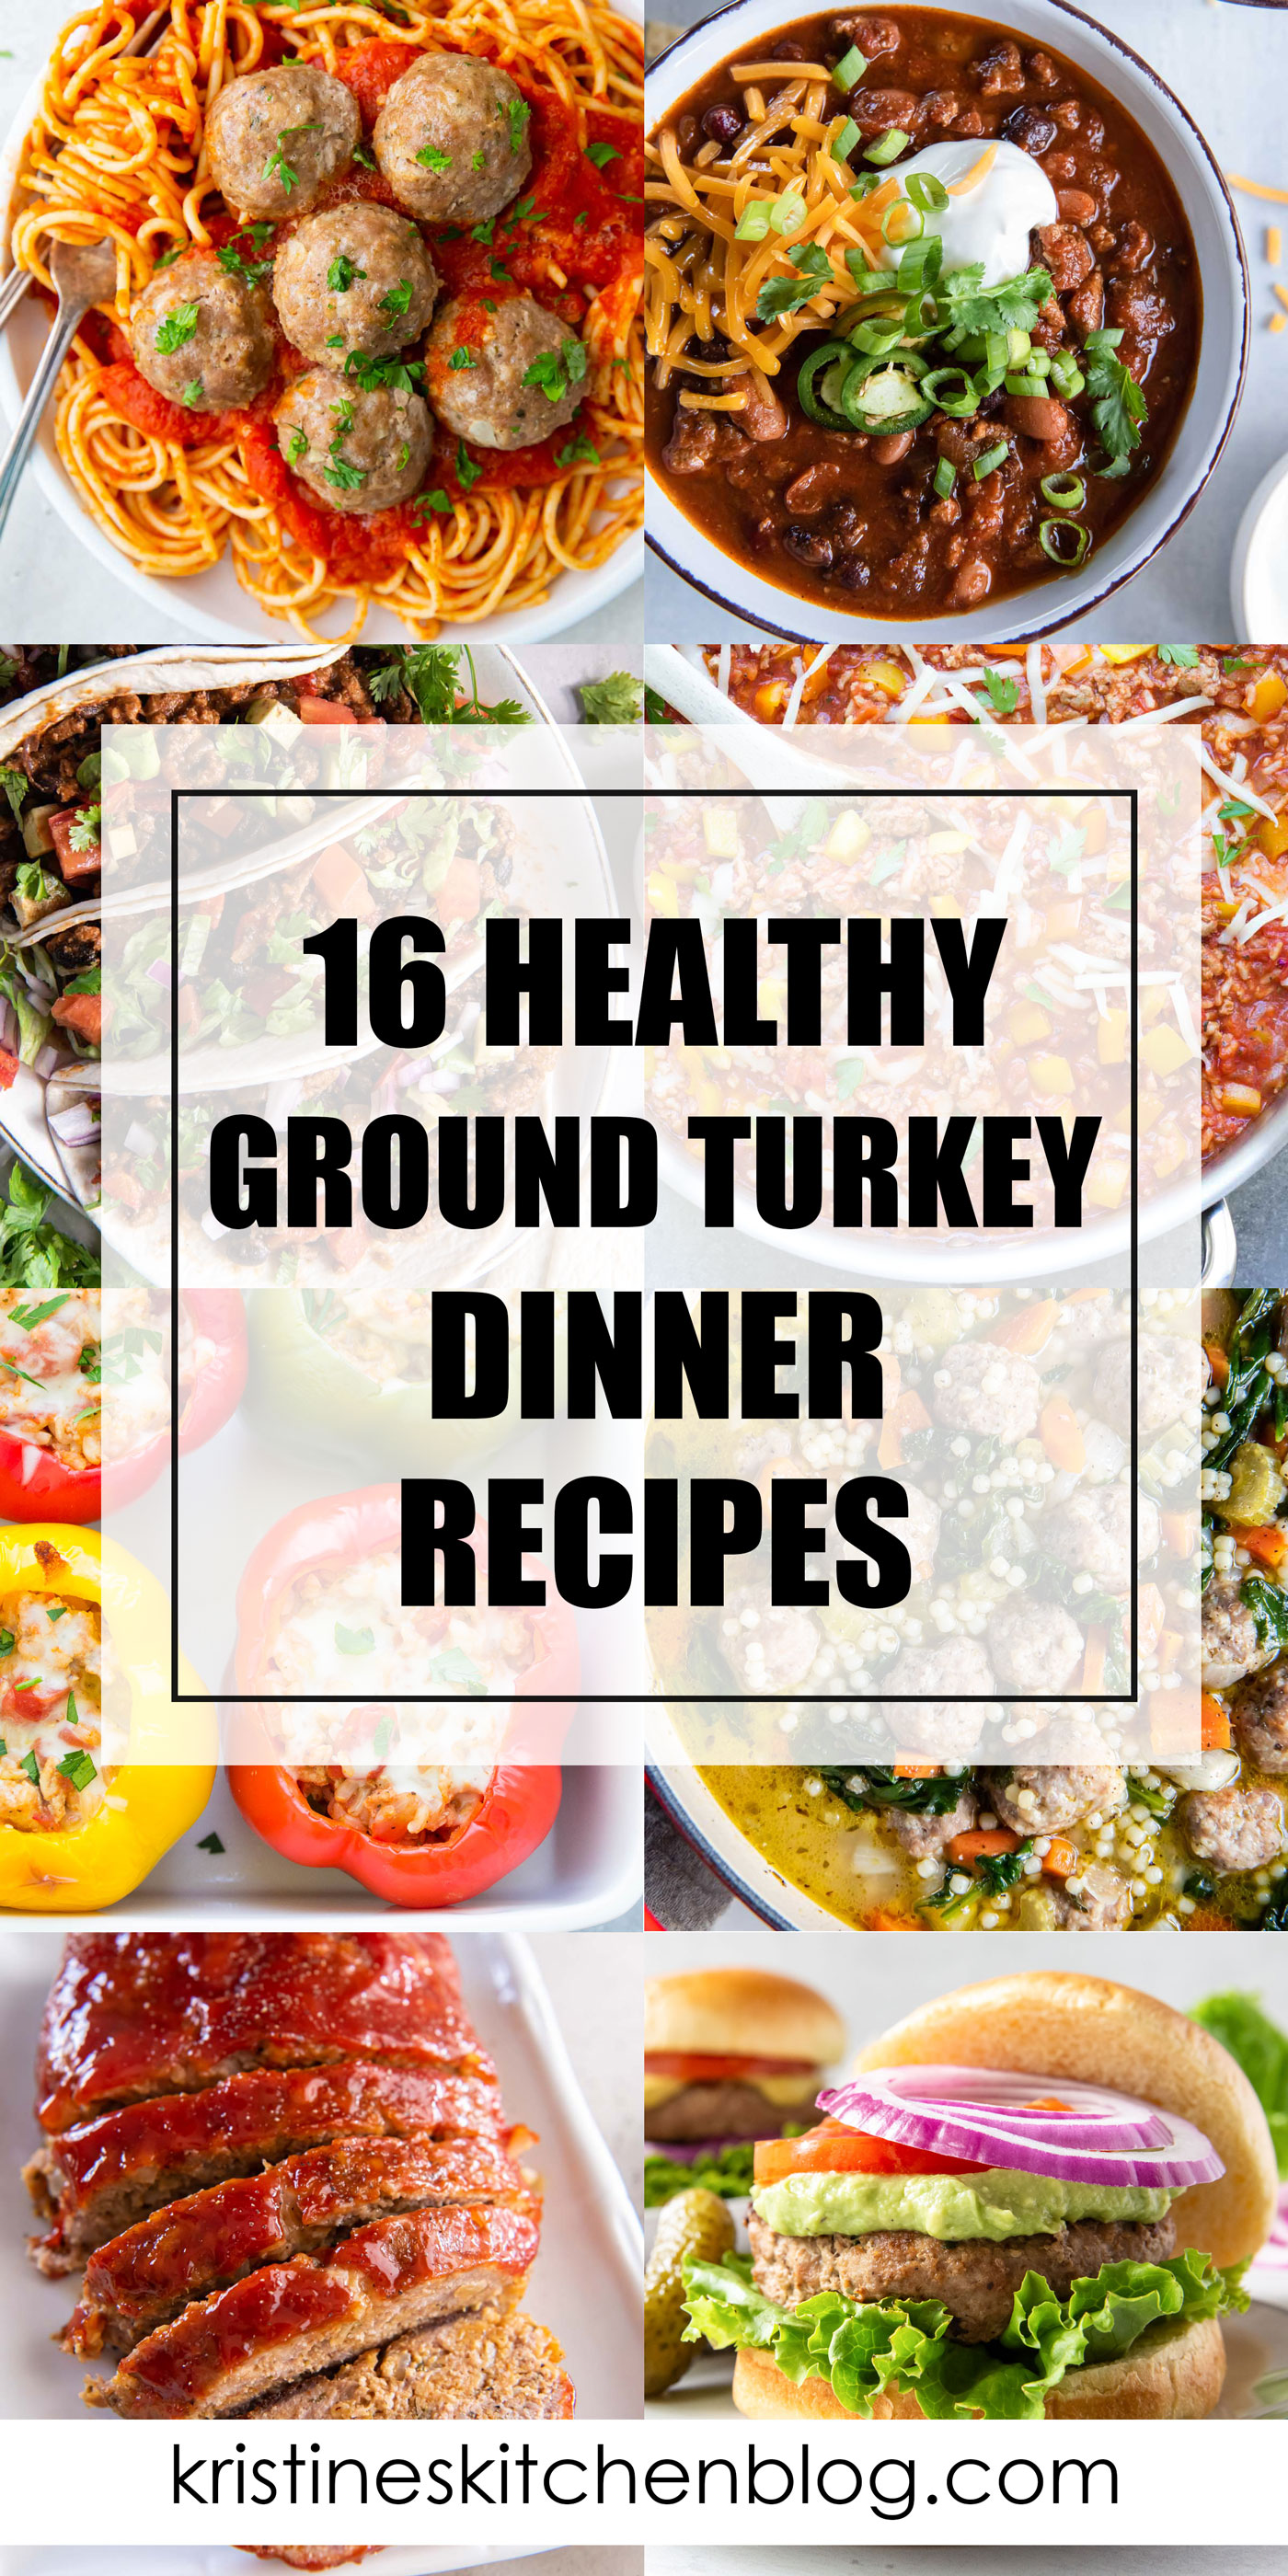 Collage of 8 photos of ground turkey dinner recipes with text overlay.